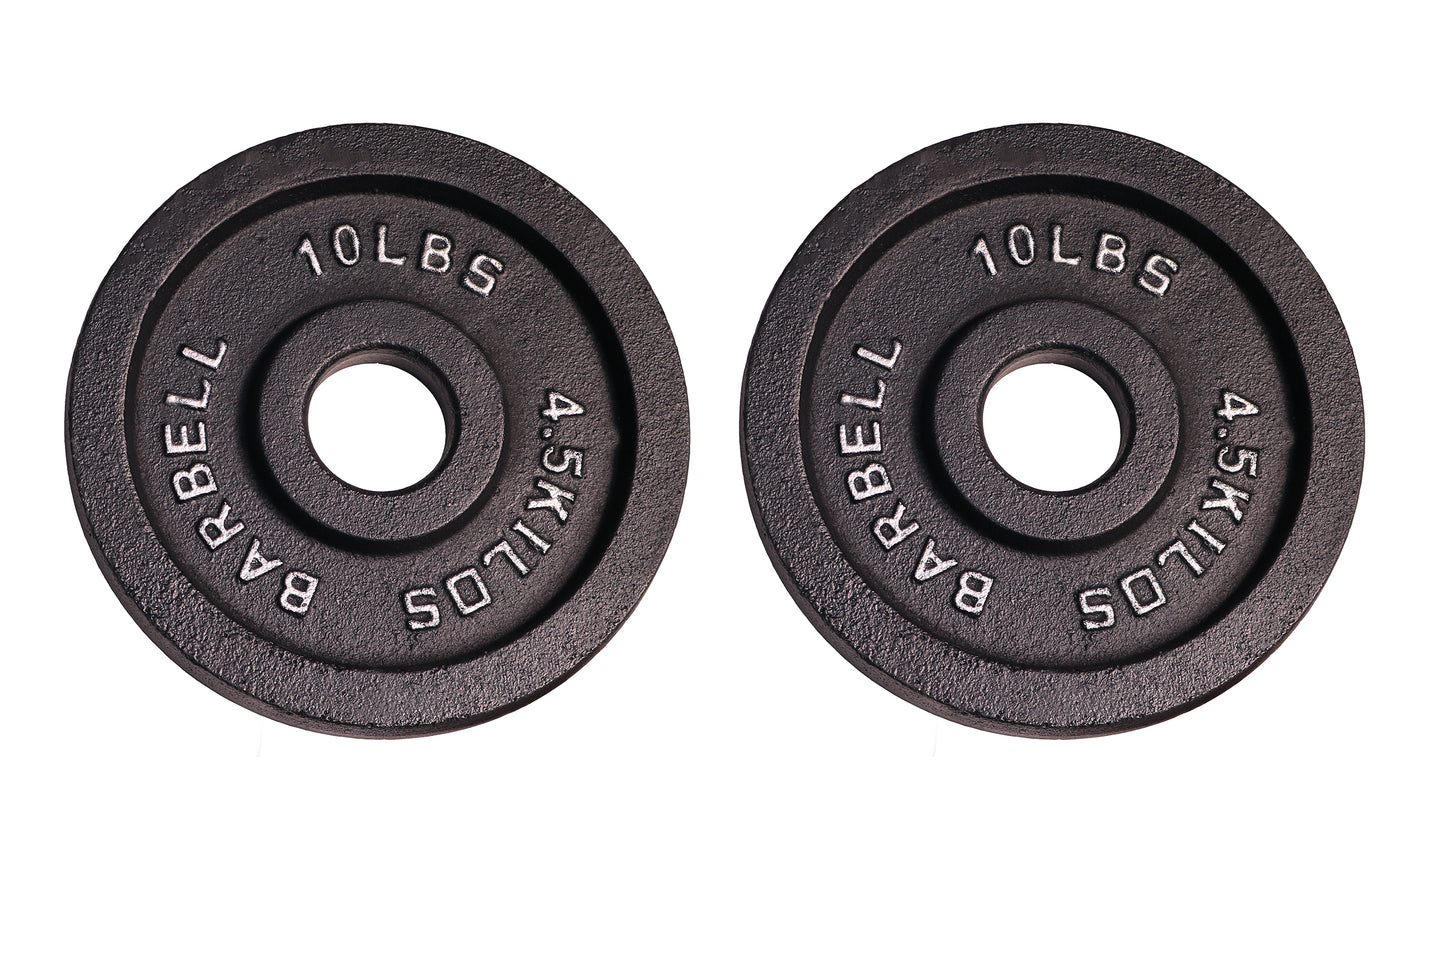 10 lb Pair of Olympic Plates (OP-010)